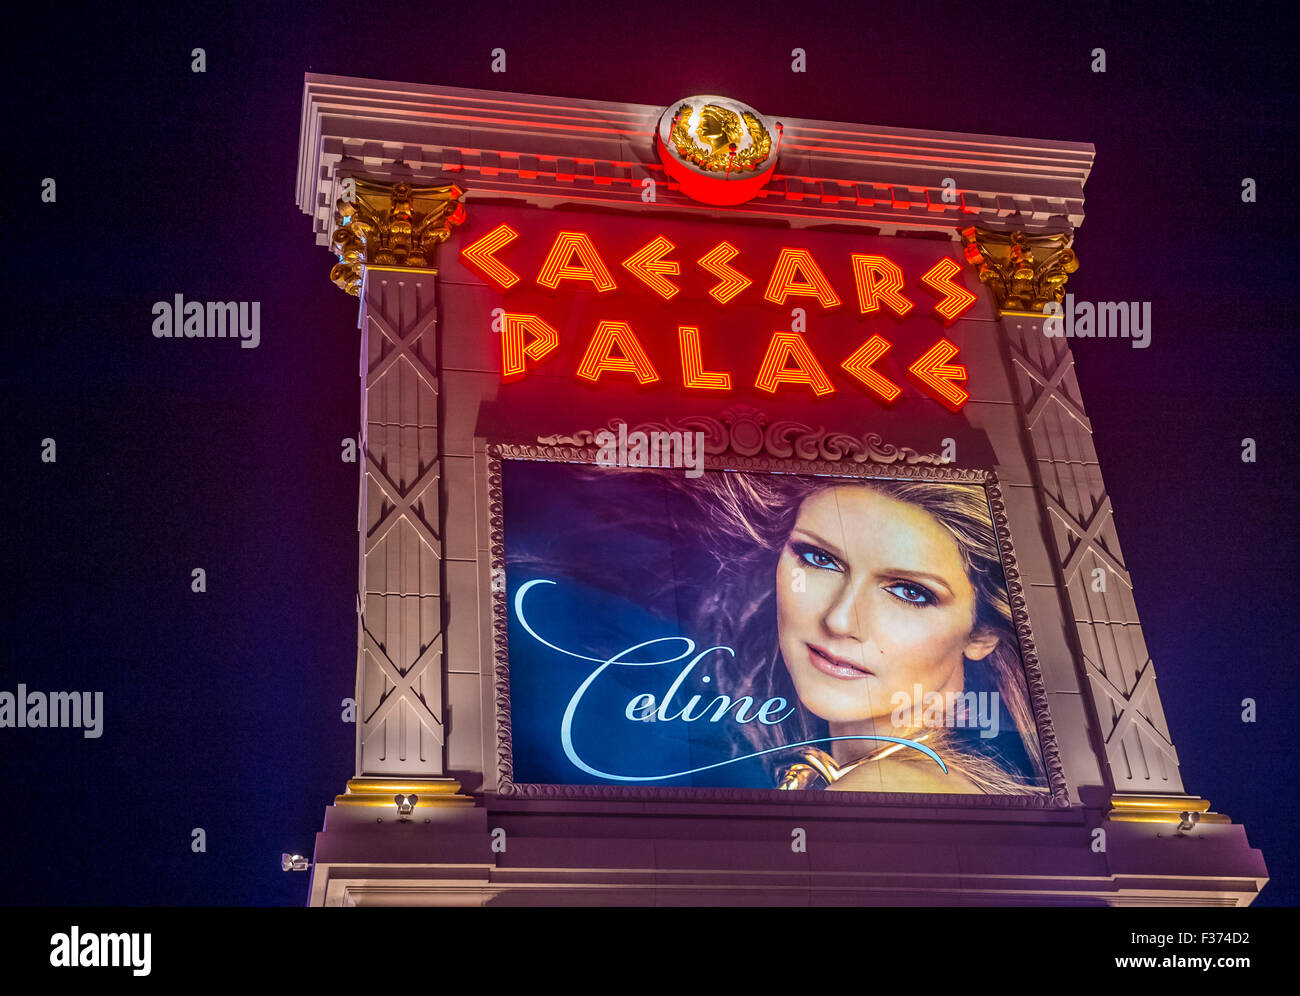 The Celine Dion show poster at Caesars palace hotel in Las Vegas Stock Photo